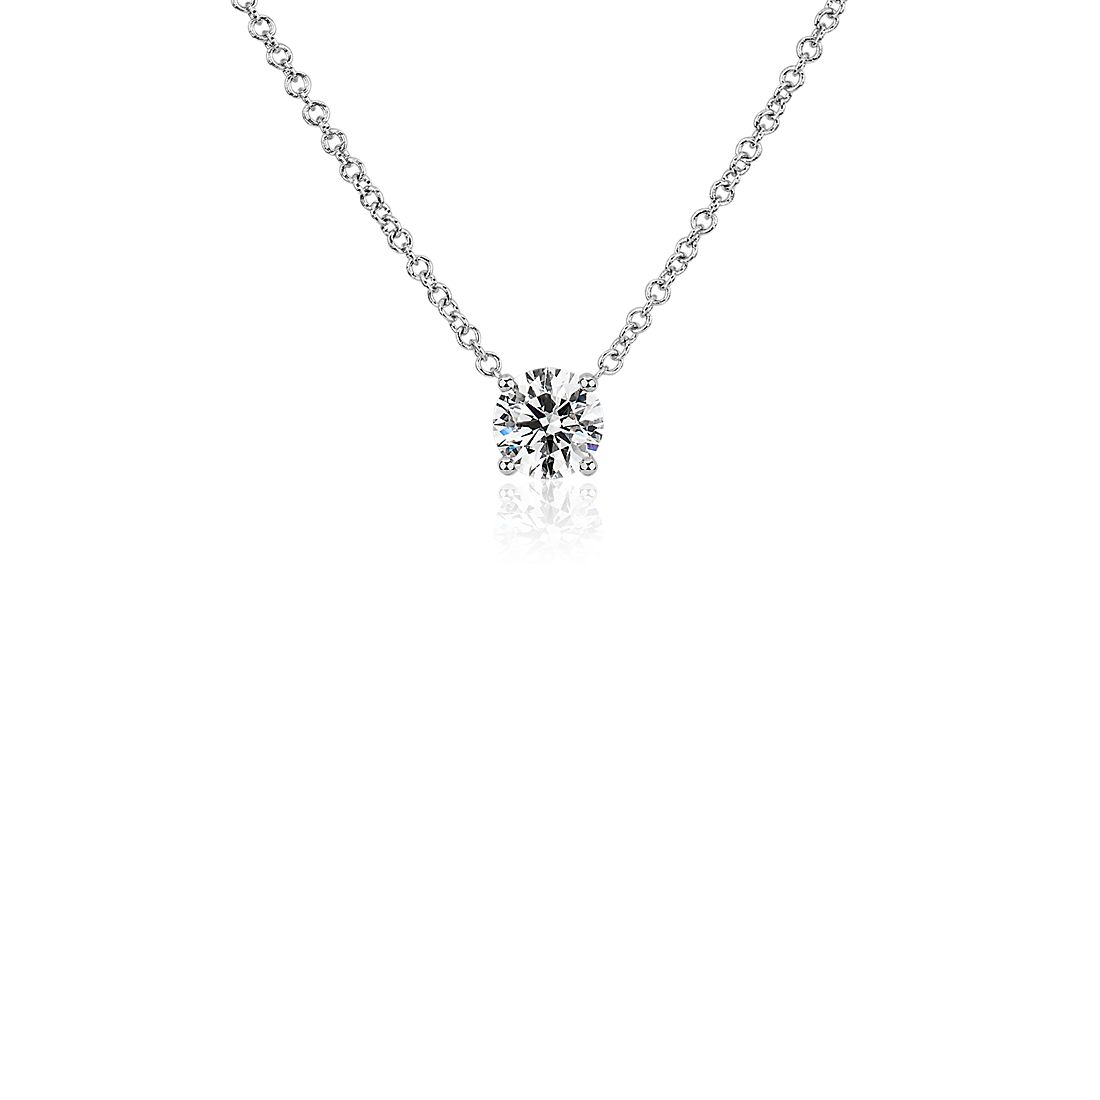 Lab Grown Diamond Floating Solitaire Pendant in 14k White Gold (1/2 ct. tw.)